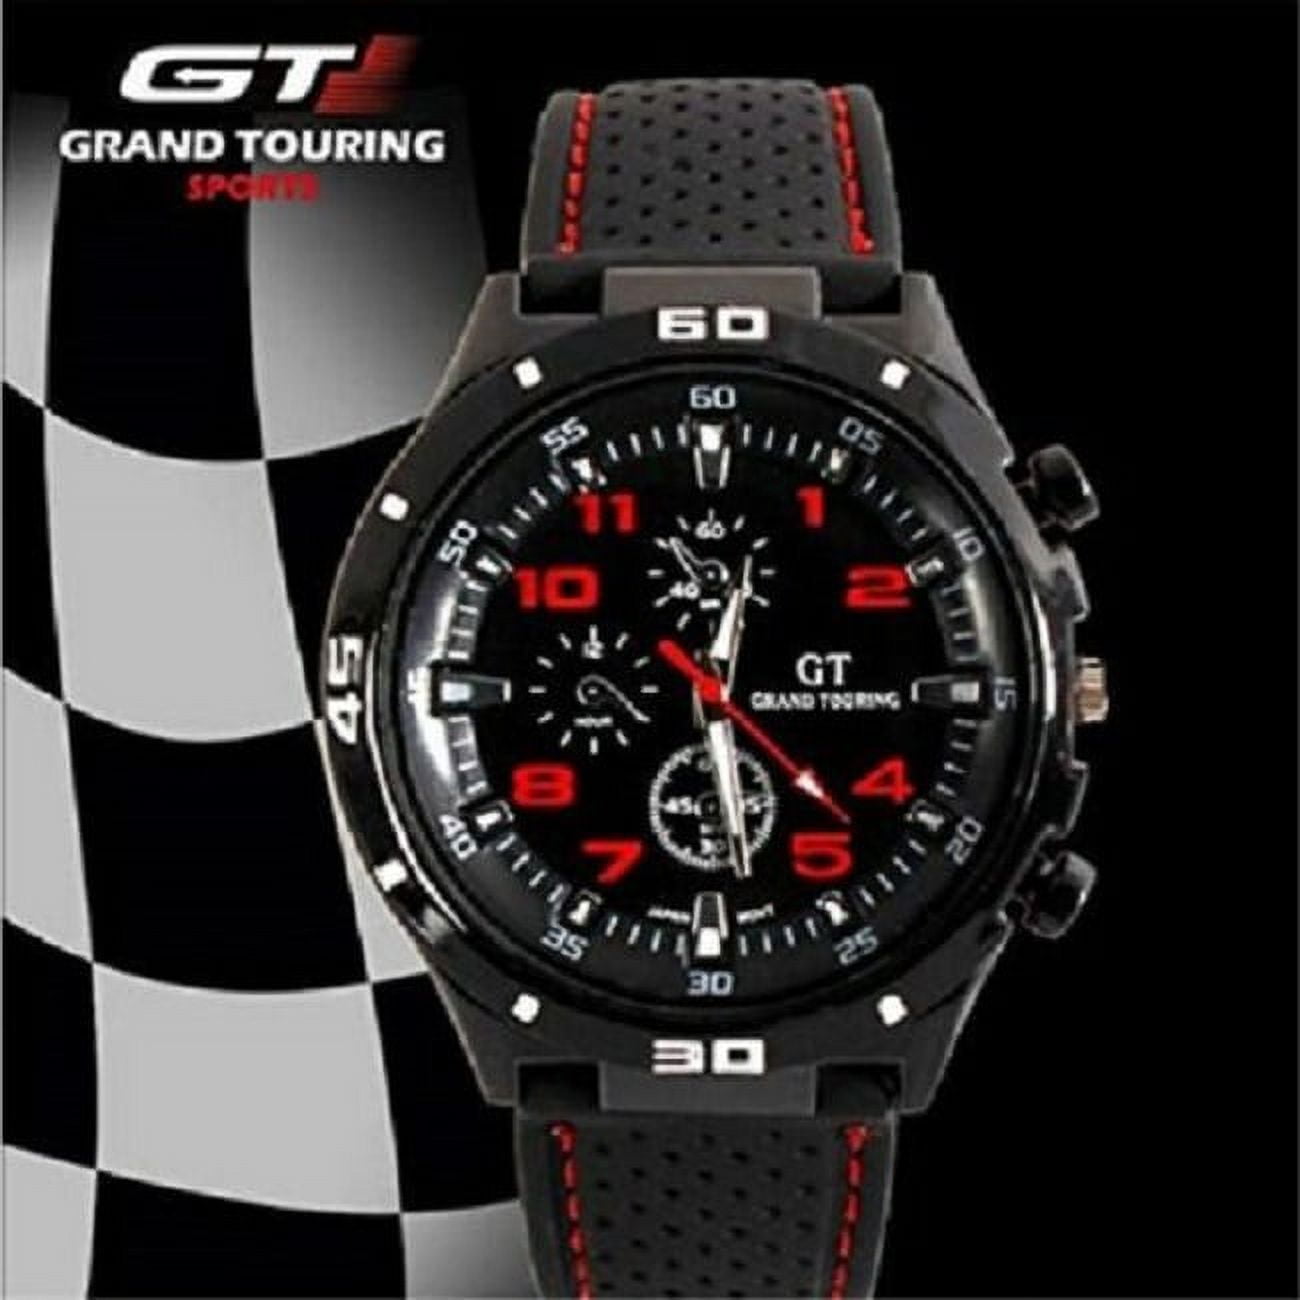 GT F1 GRAND TOURING Silicone Band Quartz Analog Sport Watch , RED